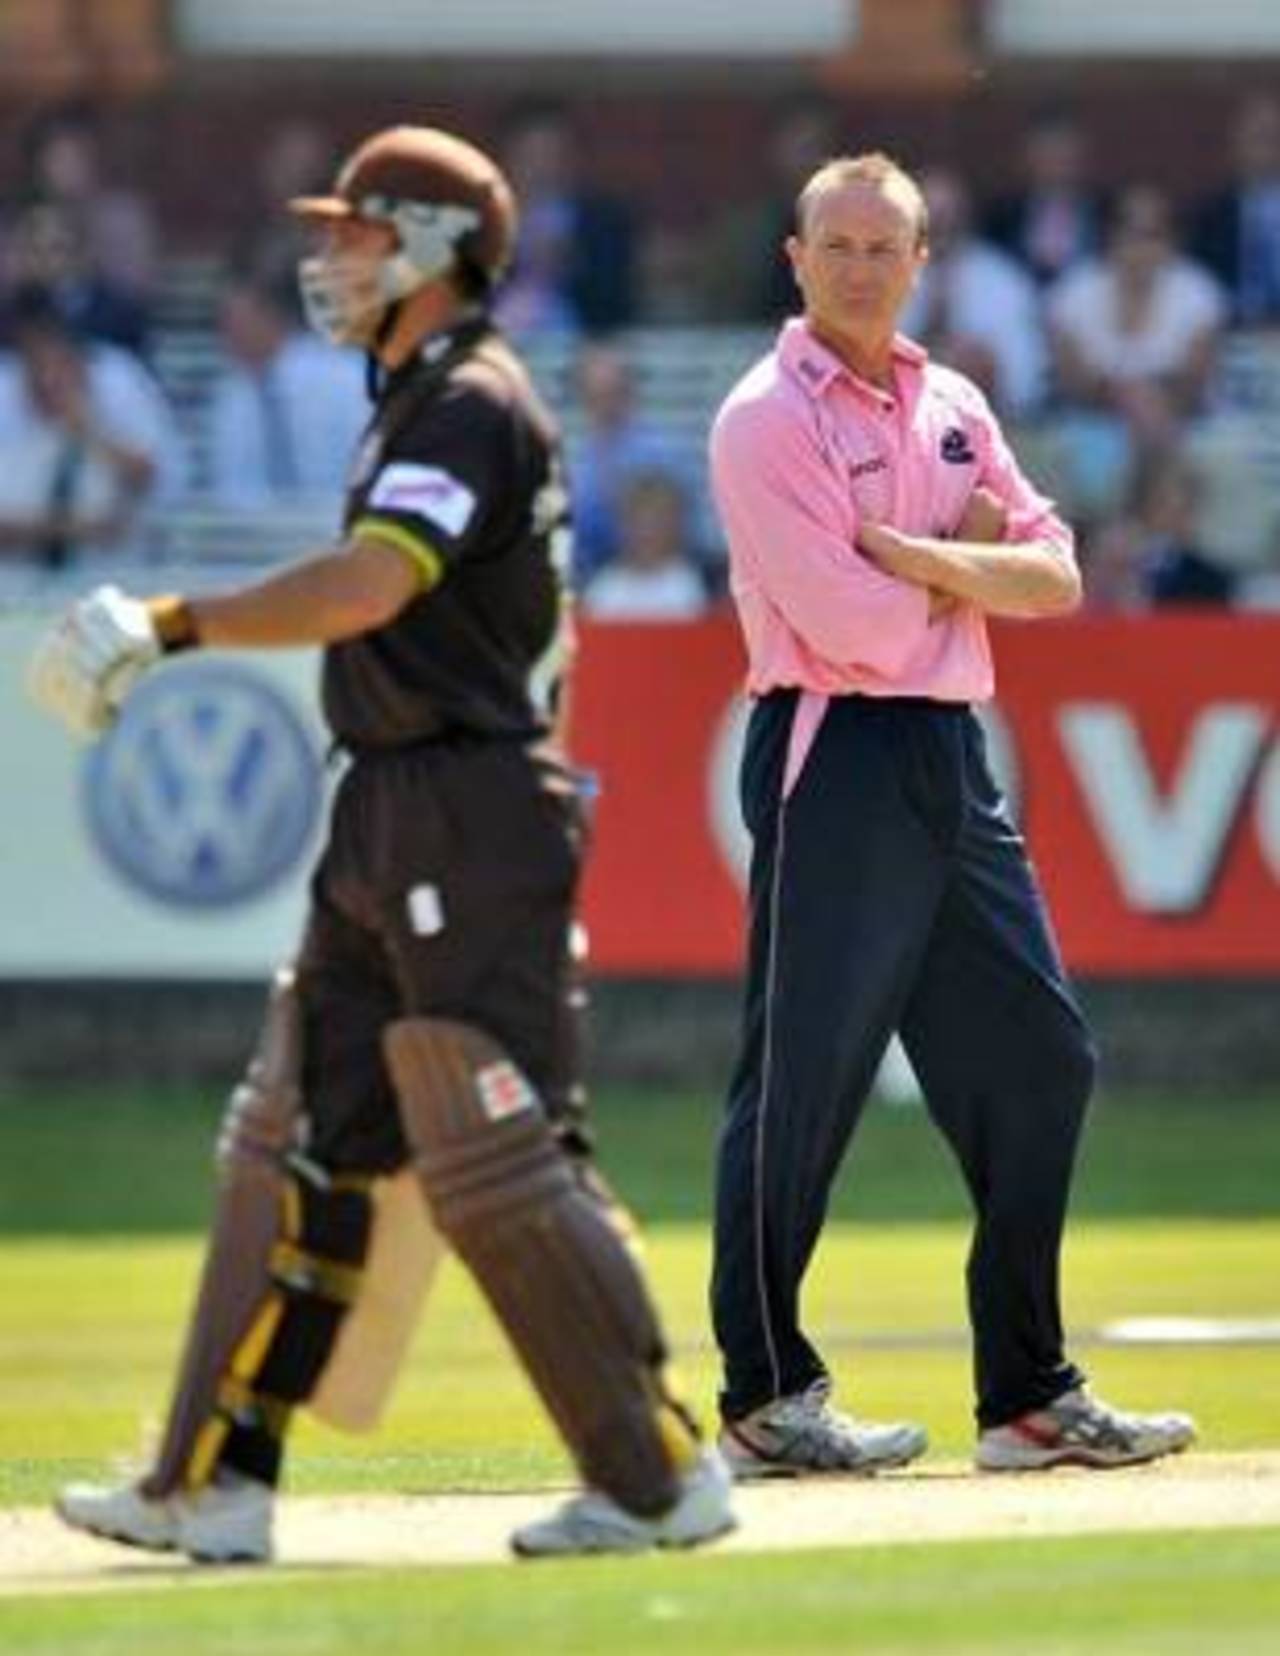 Shaun Udal isn't impressed as Surrey pile up the runs, Middlesex v Surrey, Twenty20 Cup, Lord's, May 25, 2009